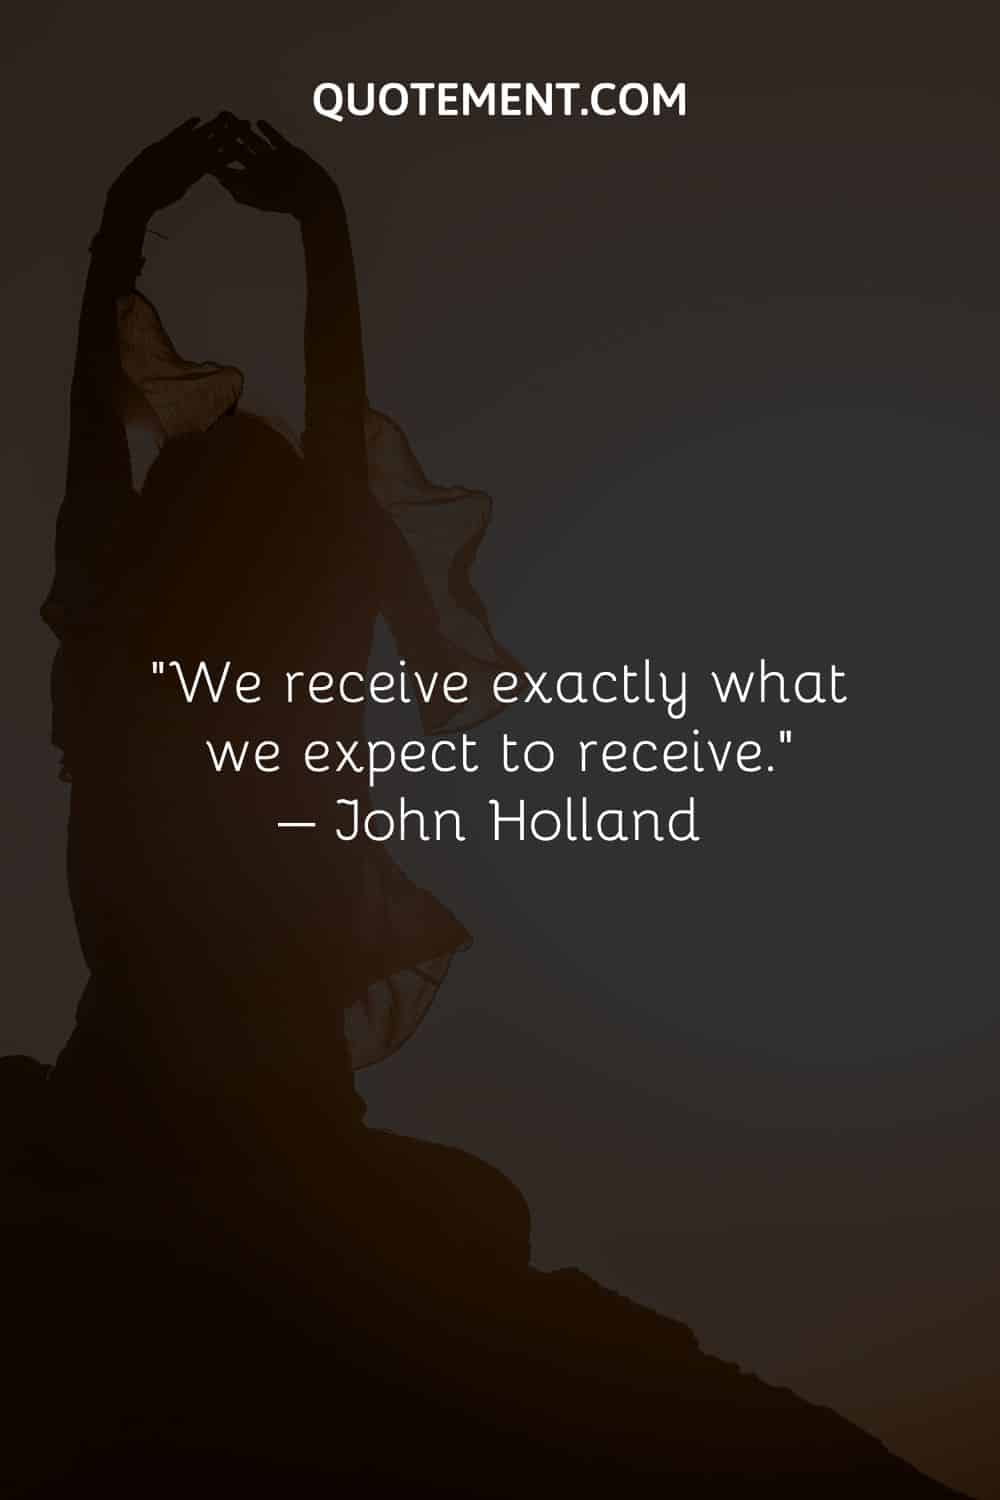 We receive exactly what we expect to receive